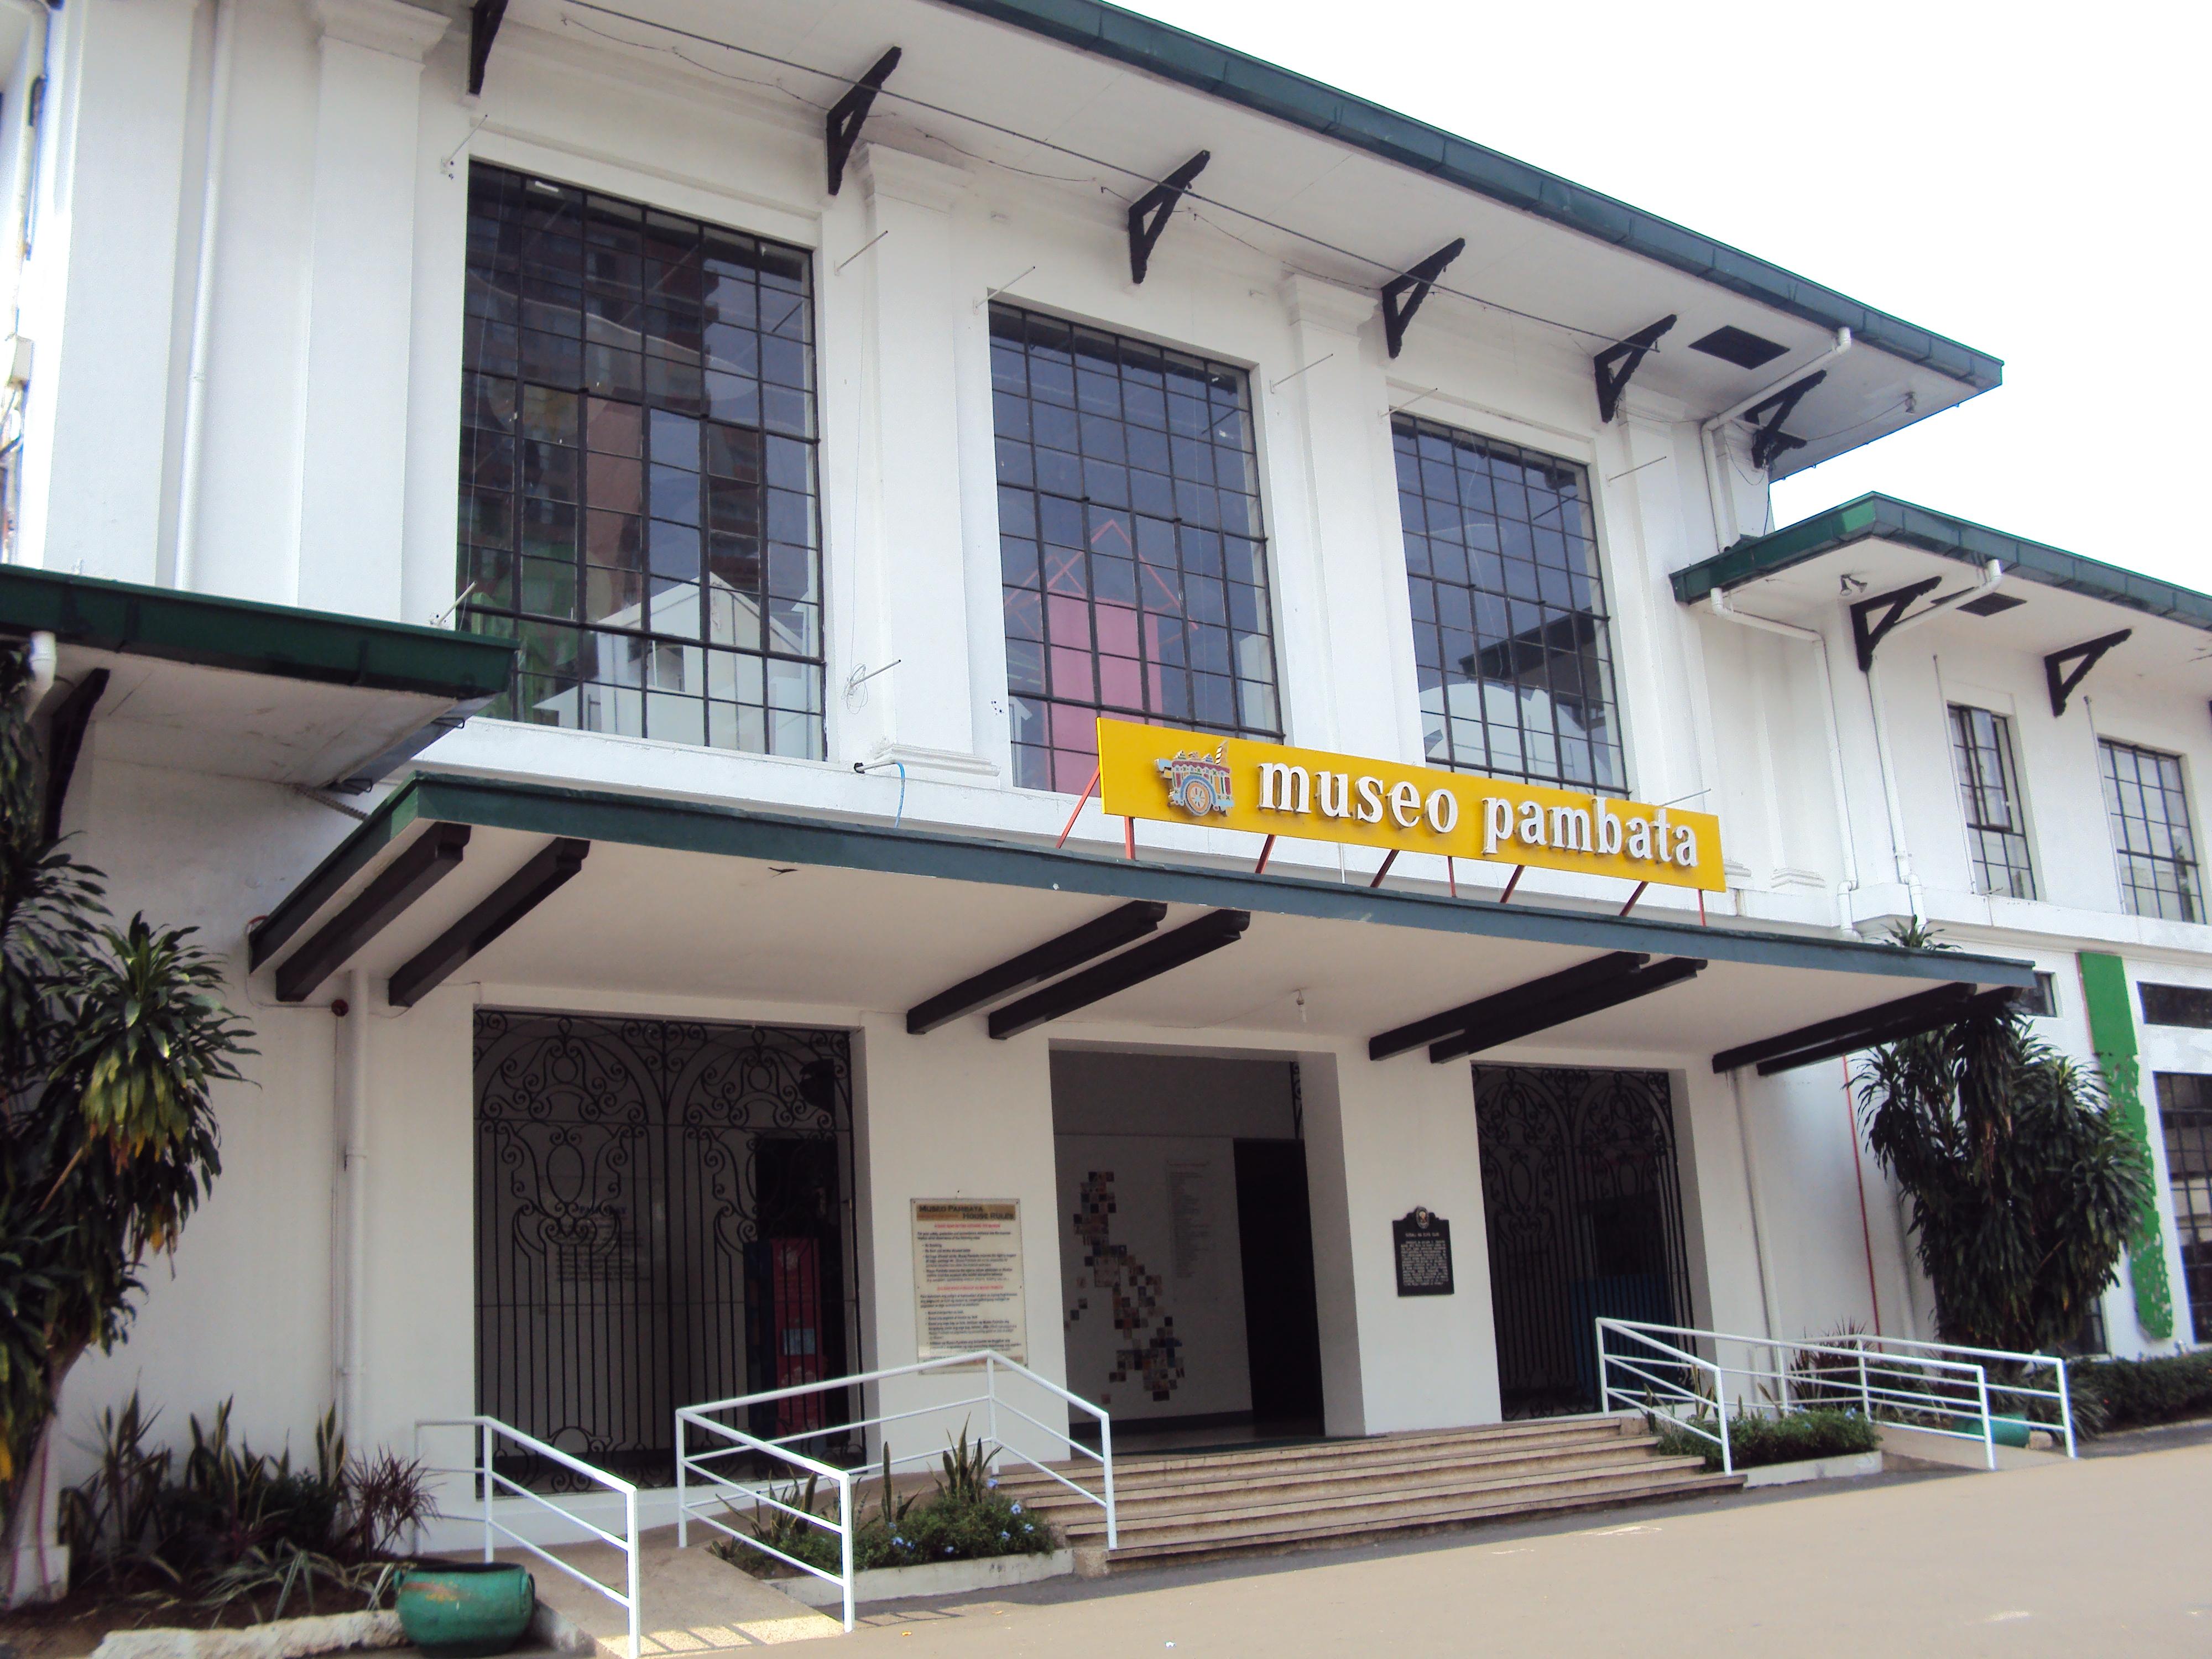 Museo Pambata: The First Children’s Museum in the Philippines